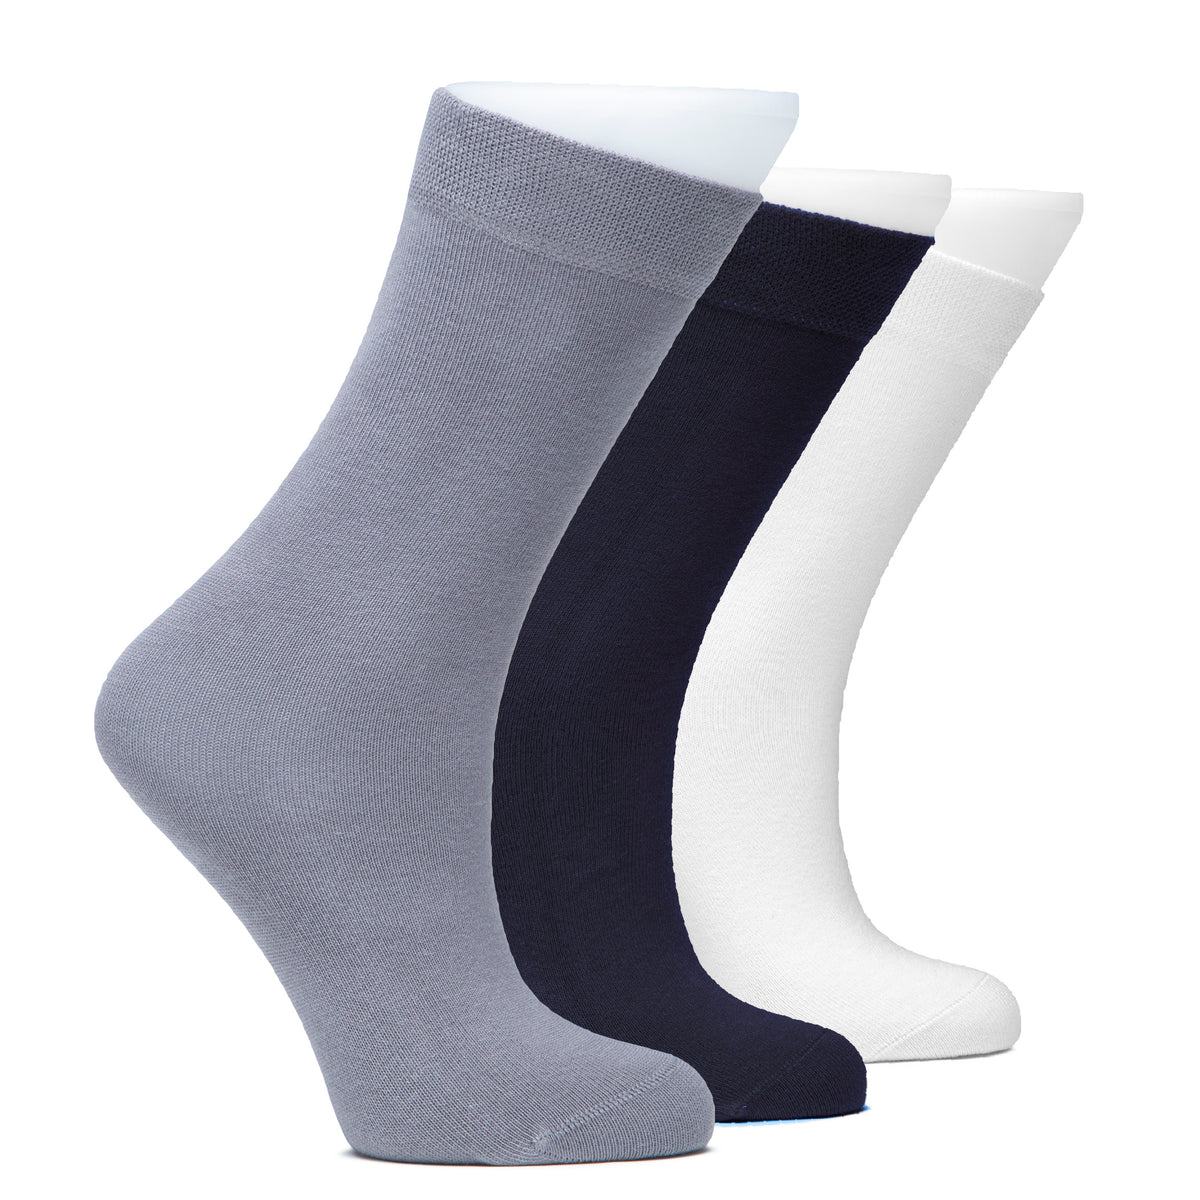 A trio of men's cotton dress crew socks in white, grey, and blue. Perfect for kids who want to look sharp and feel comfortable all day long.